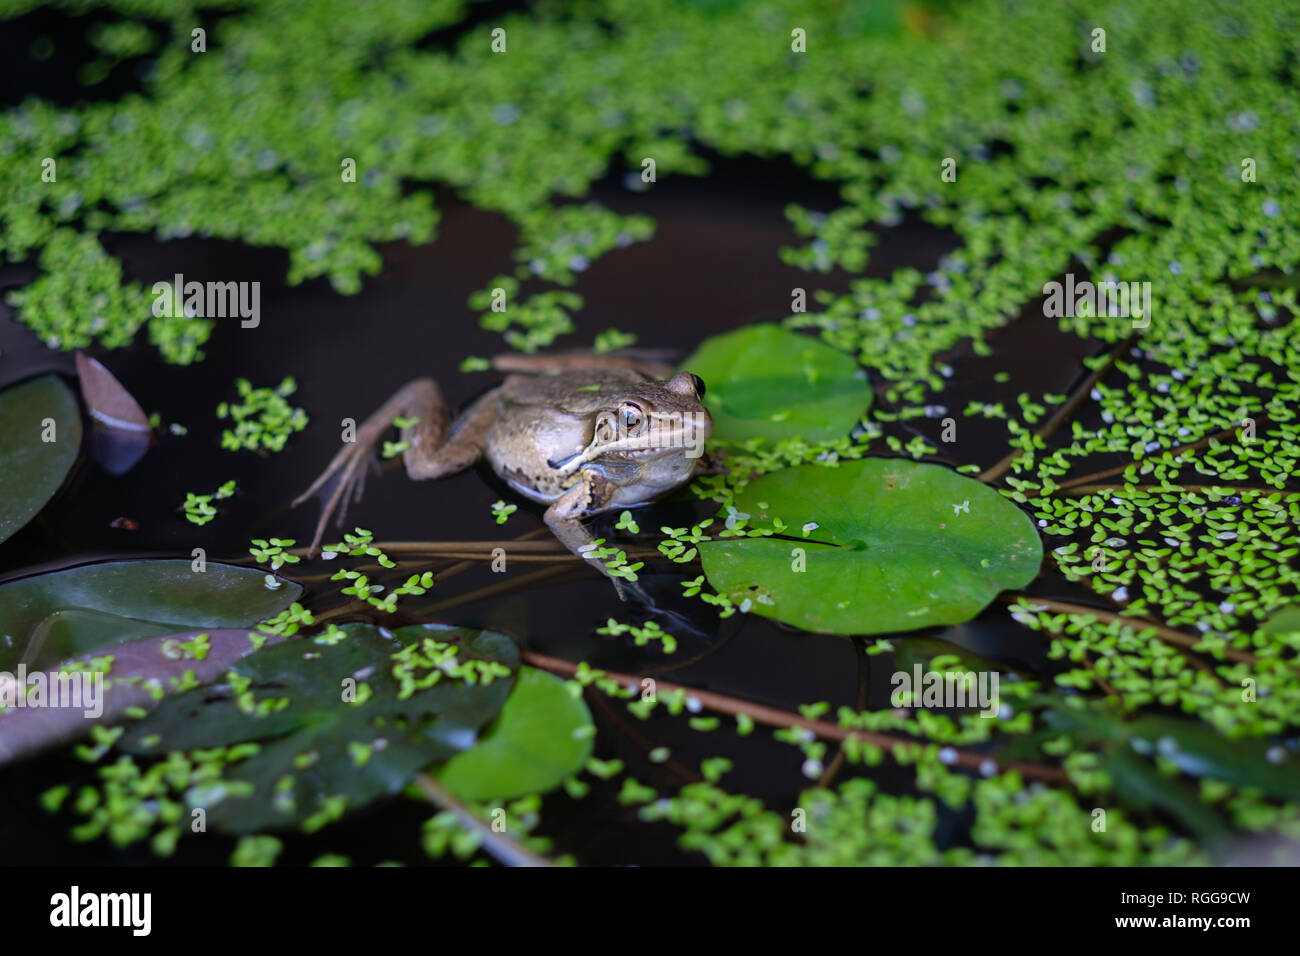 Frog in pond water Stock Photo